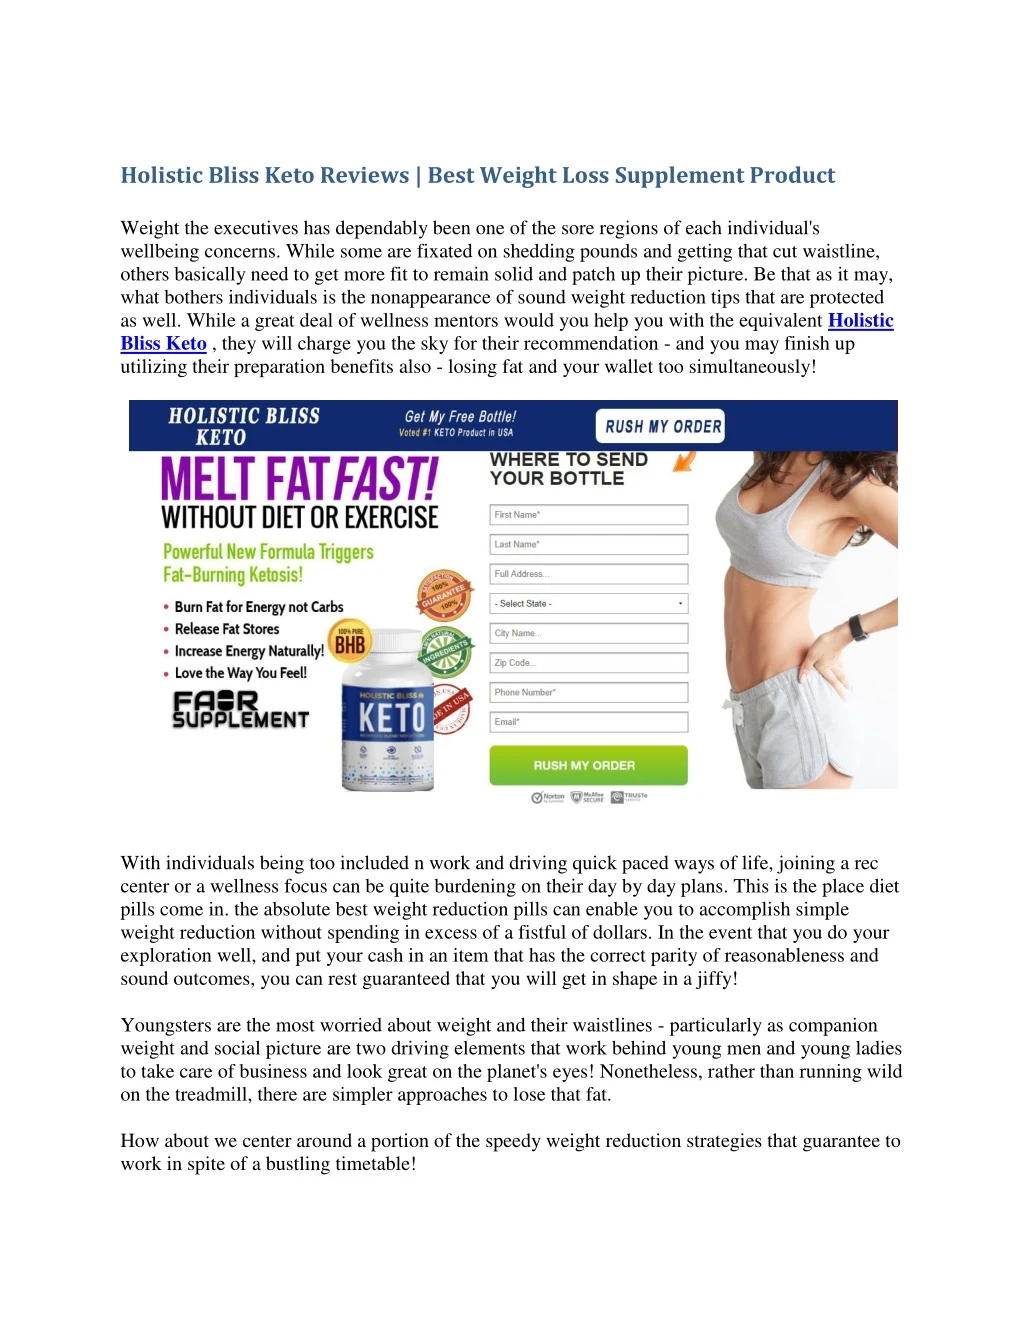 holistic bliss keto reviews best weight loss